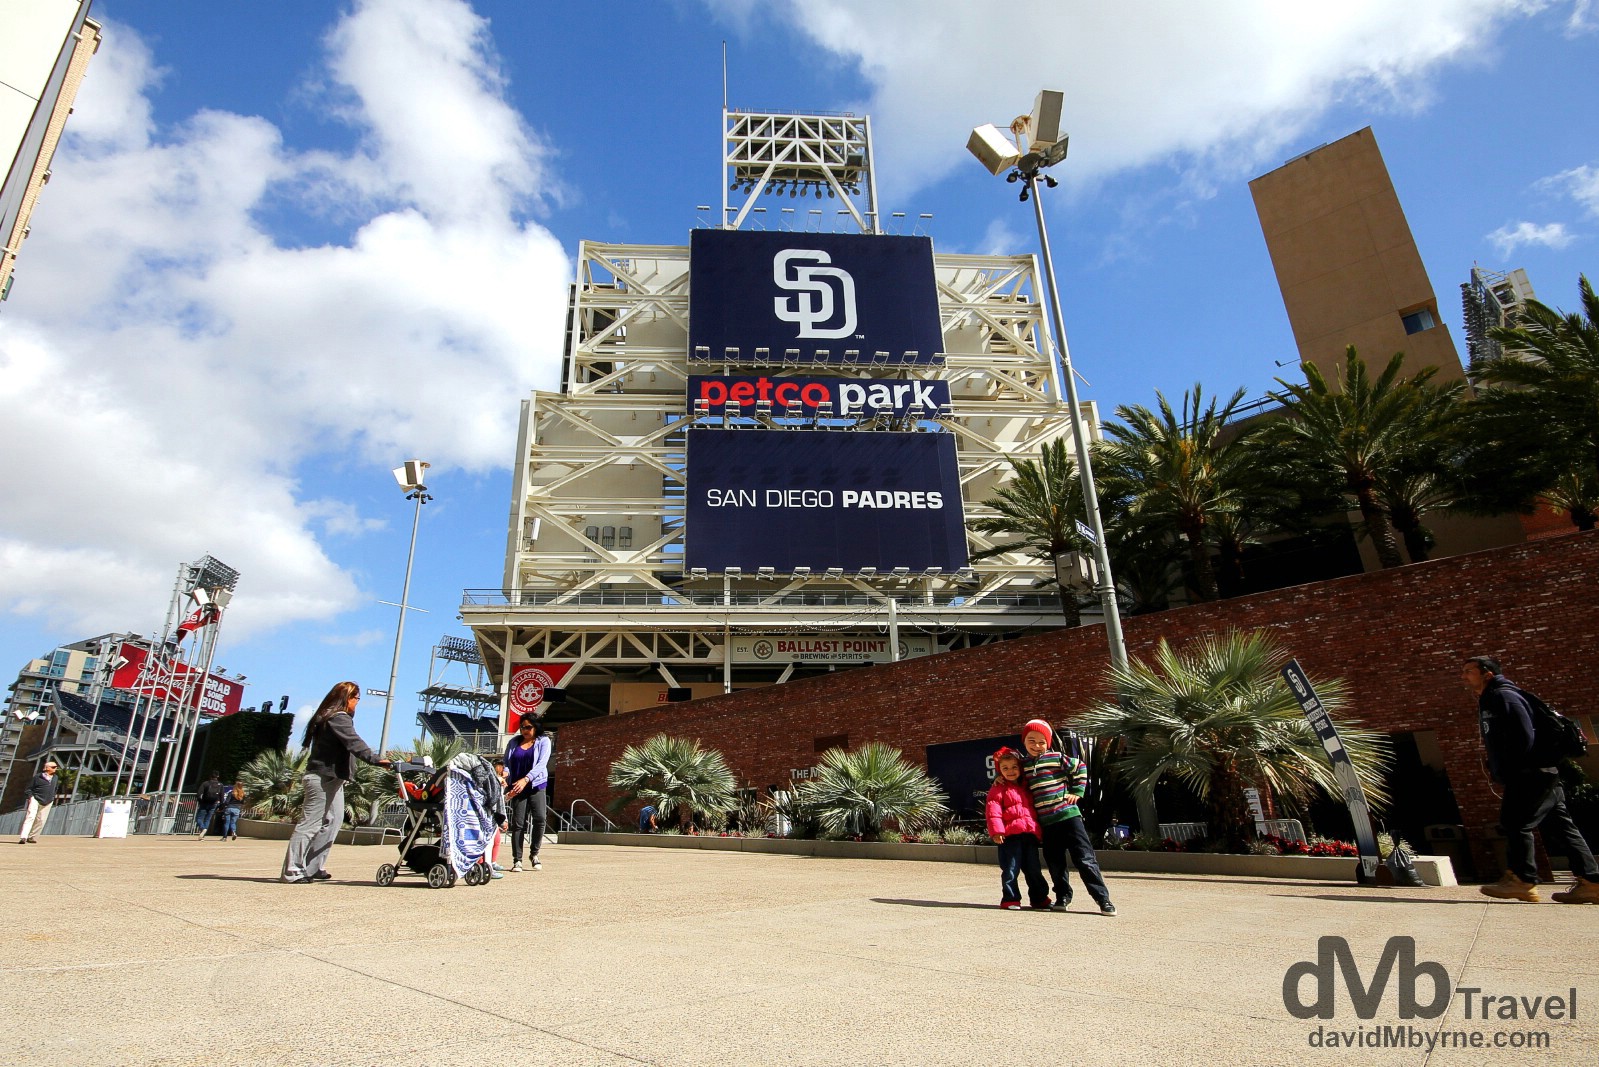 Outside Petco Park, the home of the San Diego Padres Baseball Team. San Diego, California, USA. April 16th 2013.